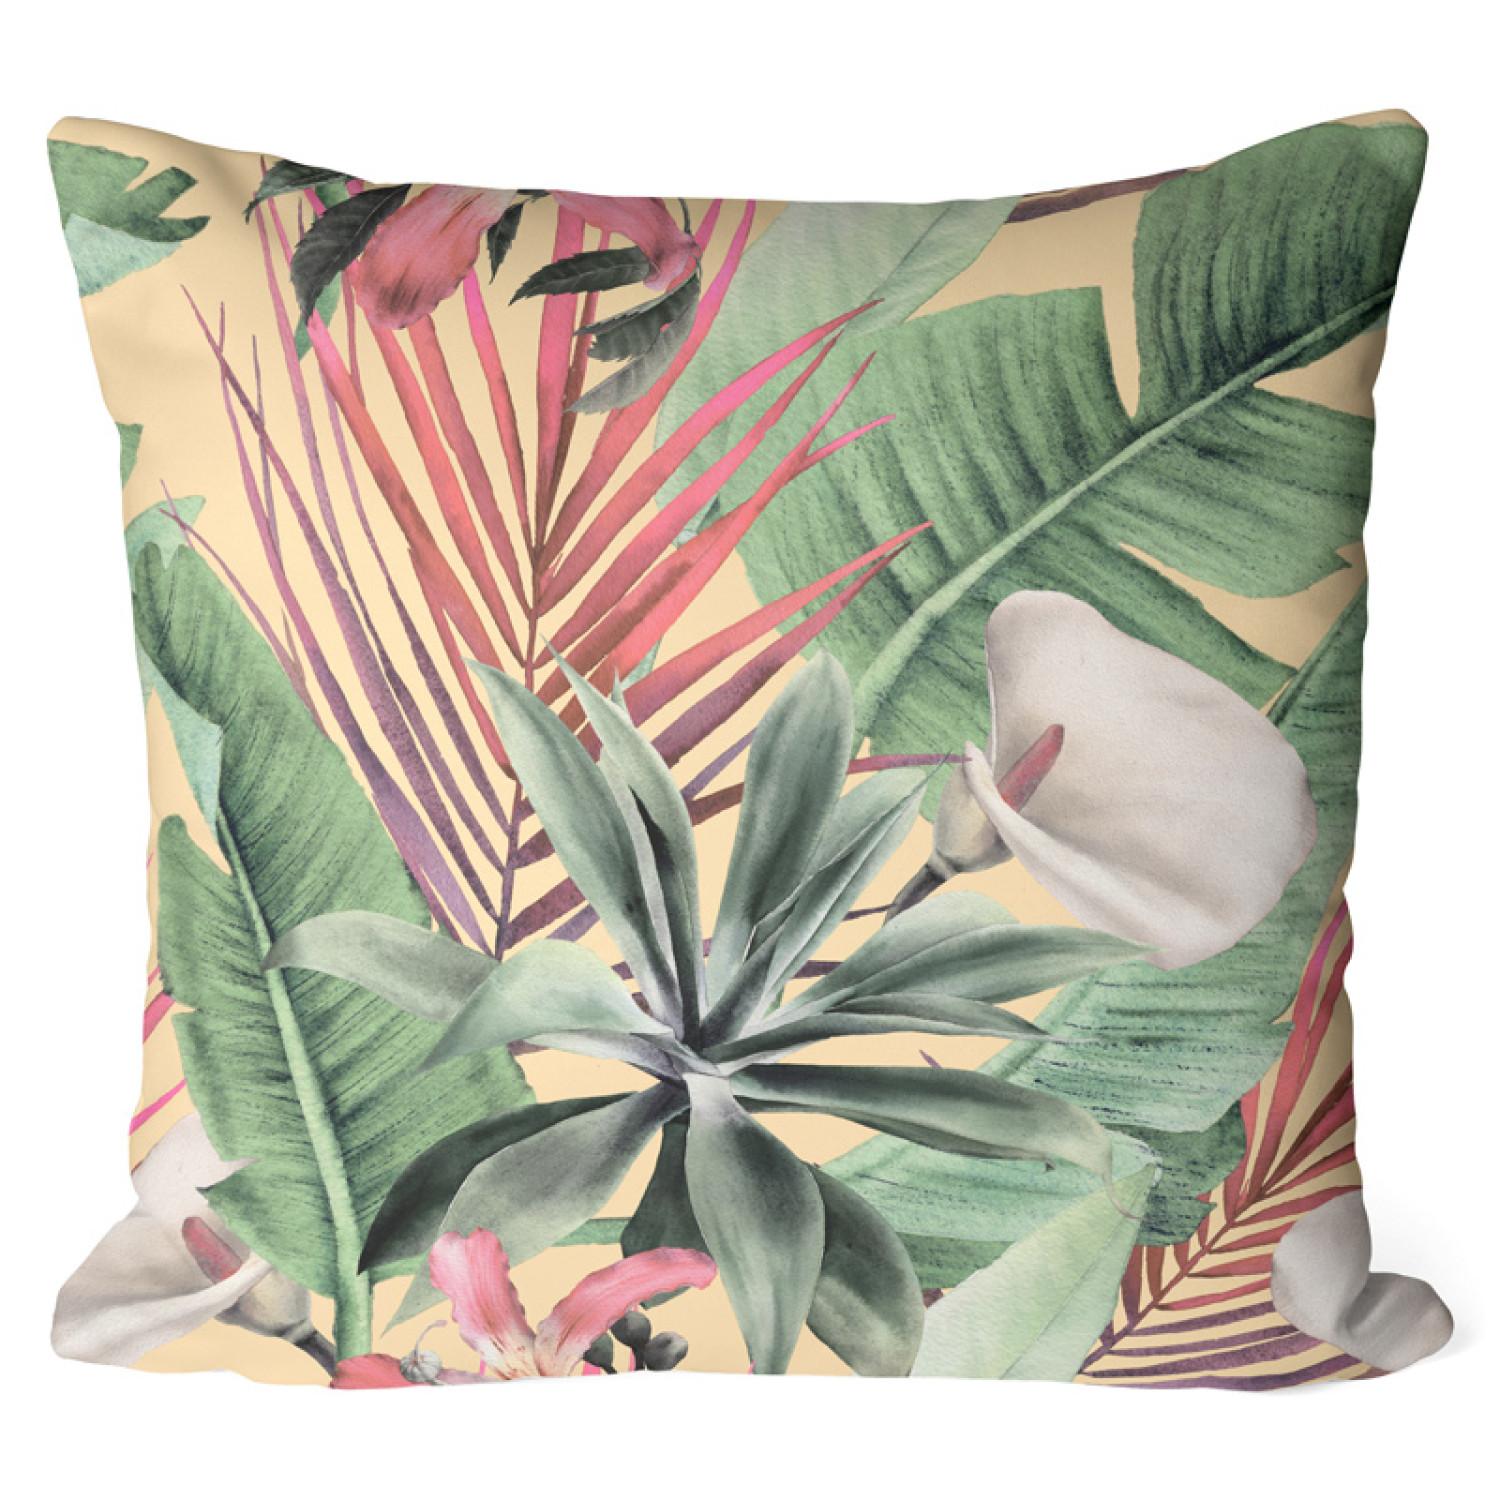 Decorative Microfiber Pillow Rainforest flora - a floral pattern with white flowers and leaves cushions